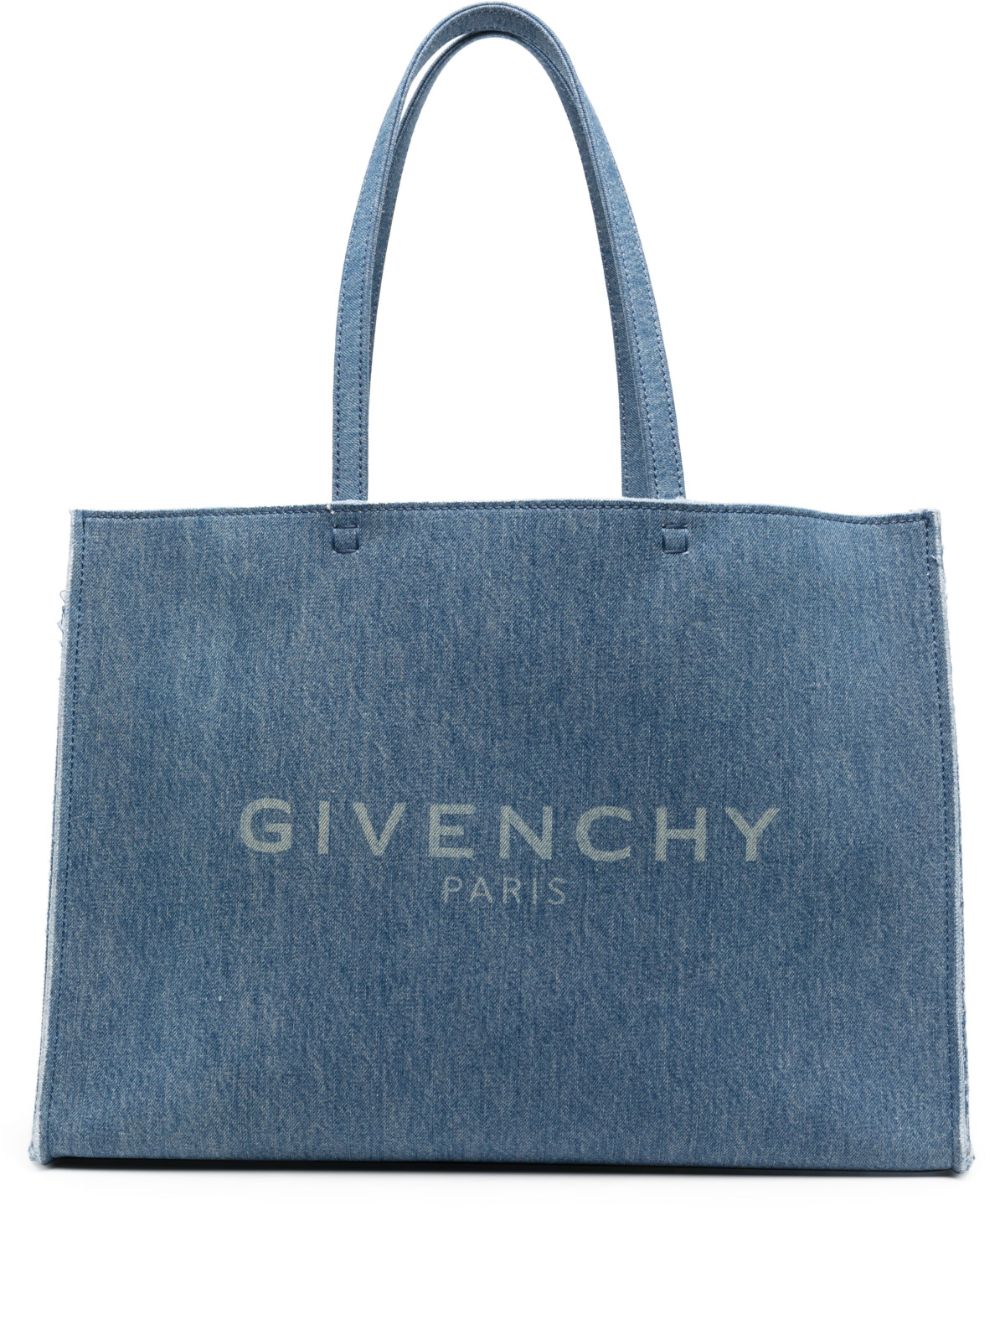 Givenchy Bags.. Blue